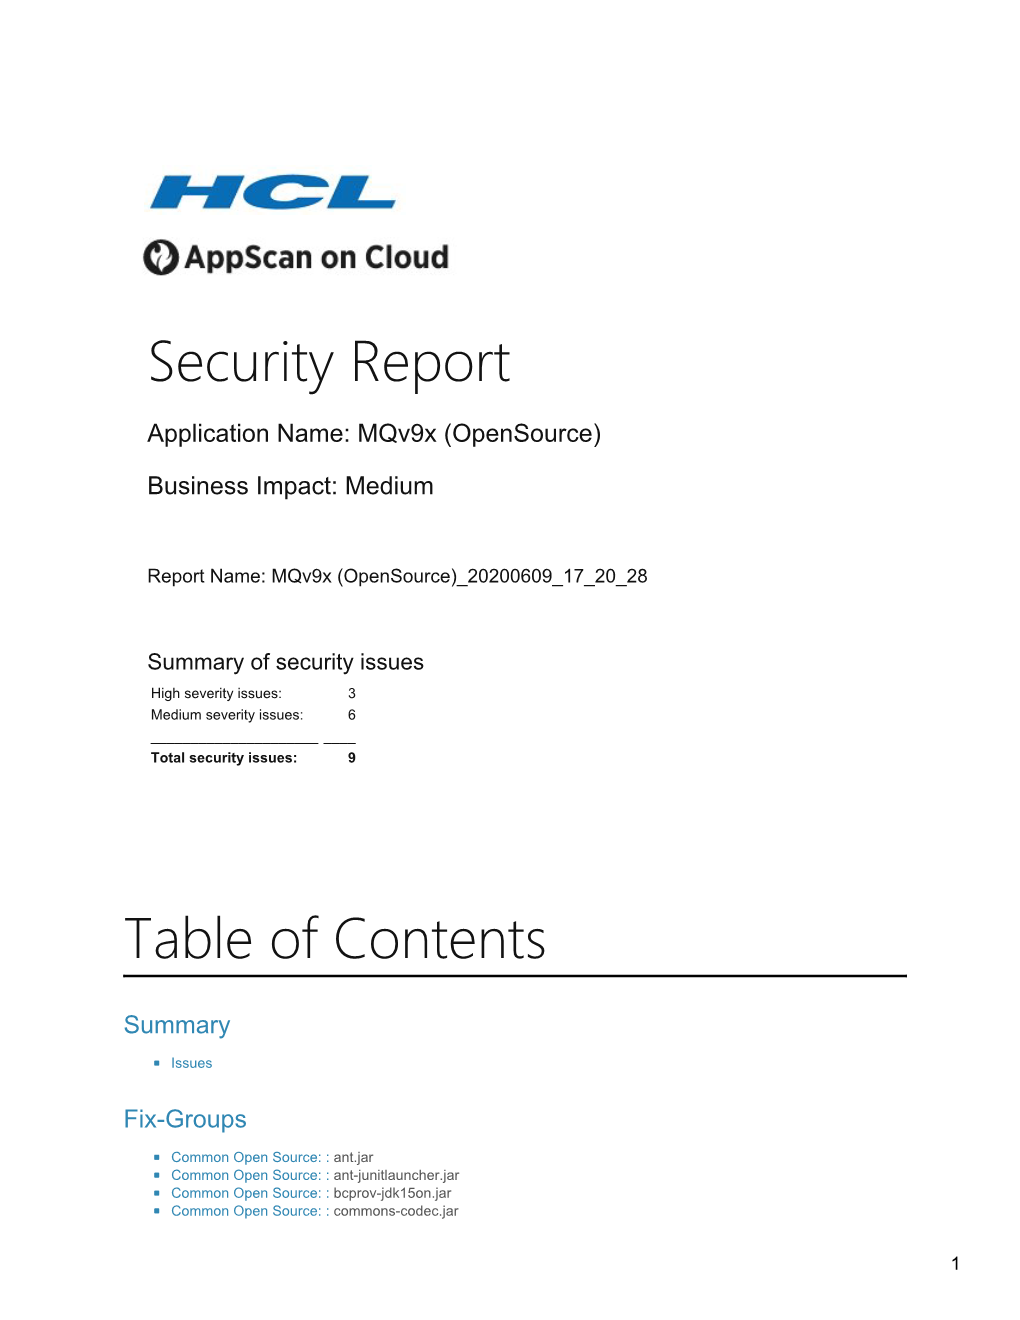 Security Report Table of Contents